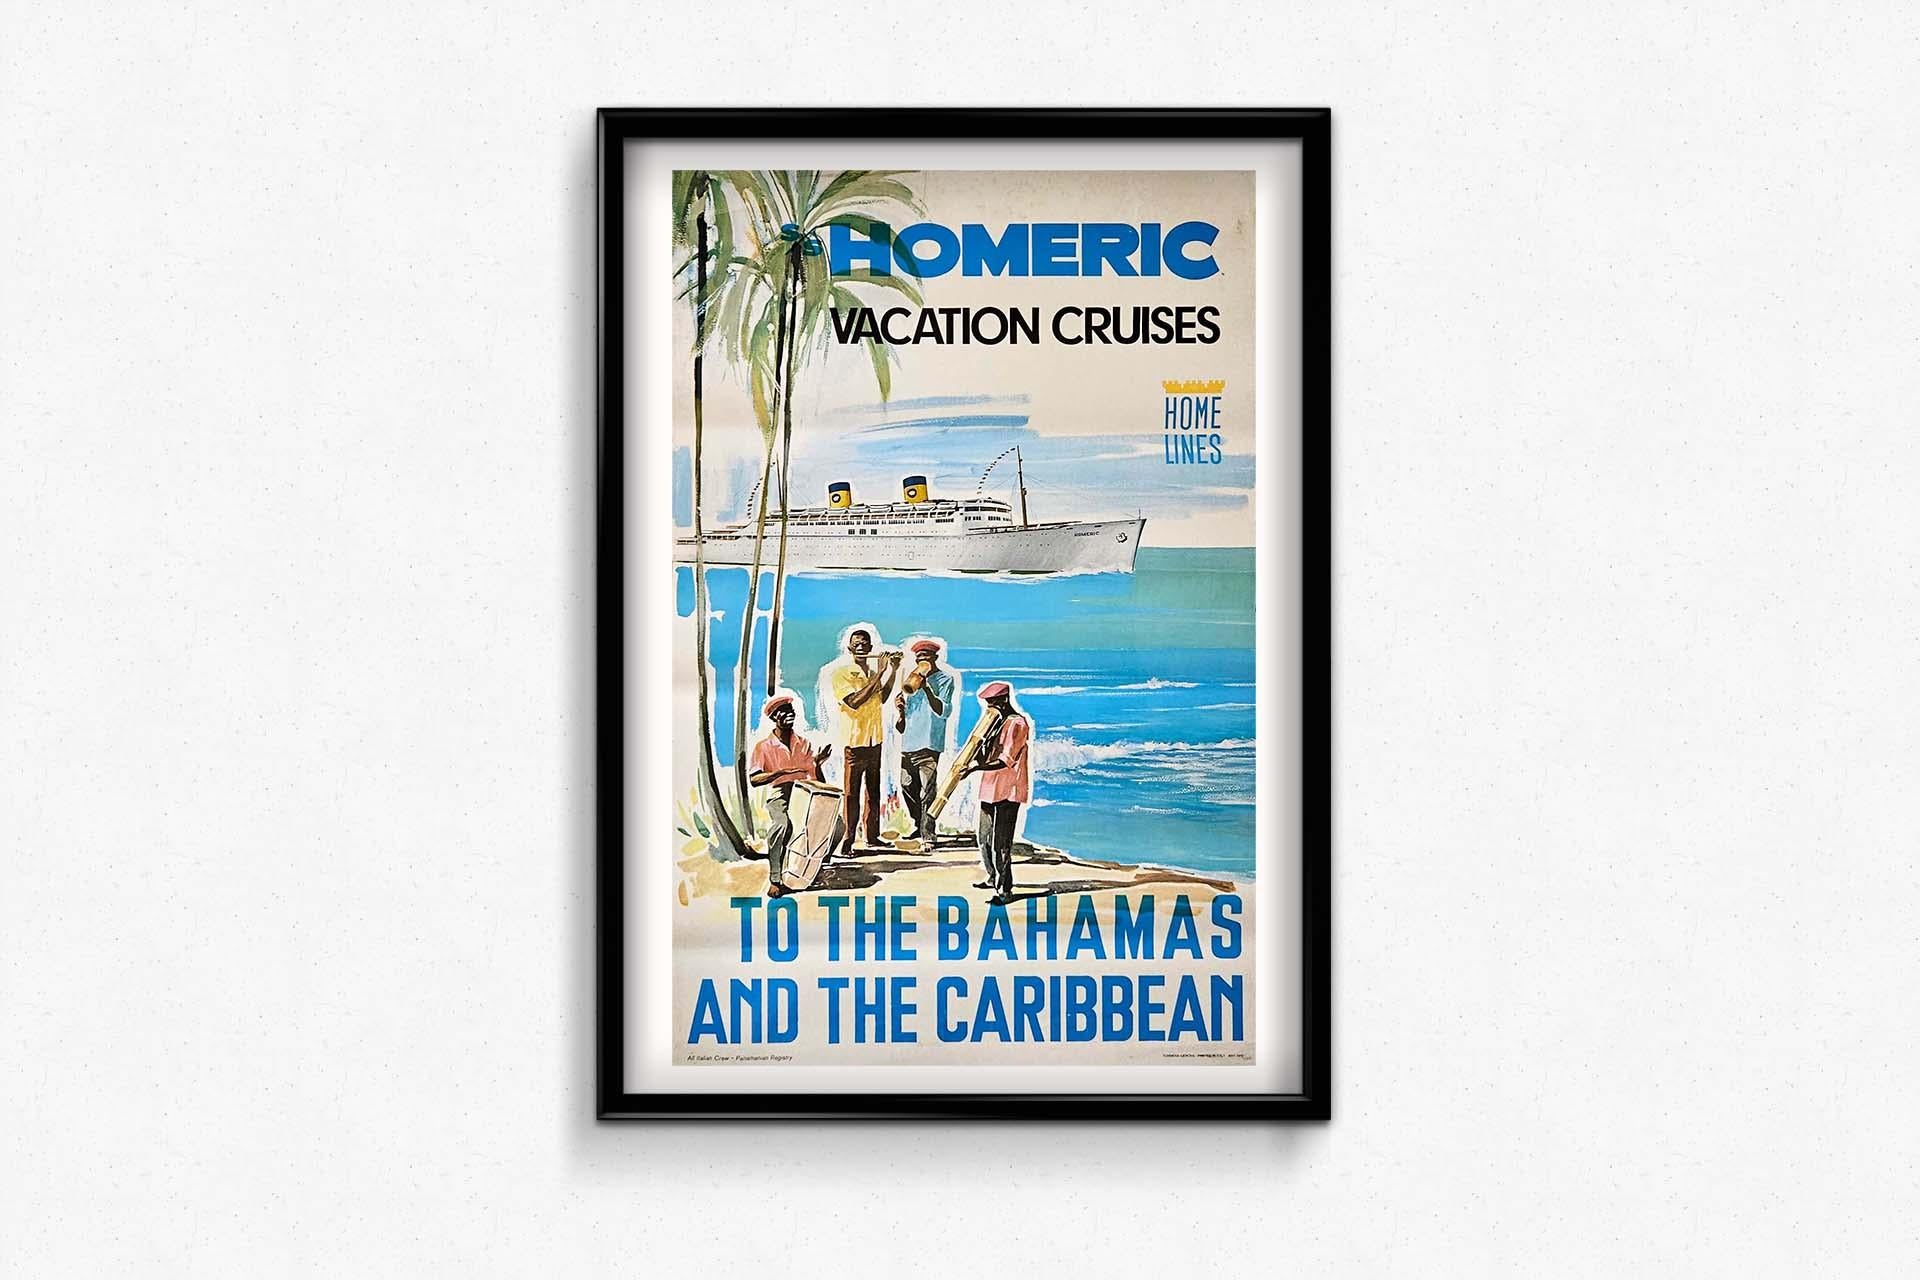 The original poster advertising S/S Homeric vacation cruises by Home Lines in 1972 offers a captivating glimpse into the allure of luxury travel to the Bahamas and the Caribbean during the era.
Crafted with vibrant colors and evocative imagery, the